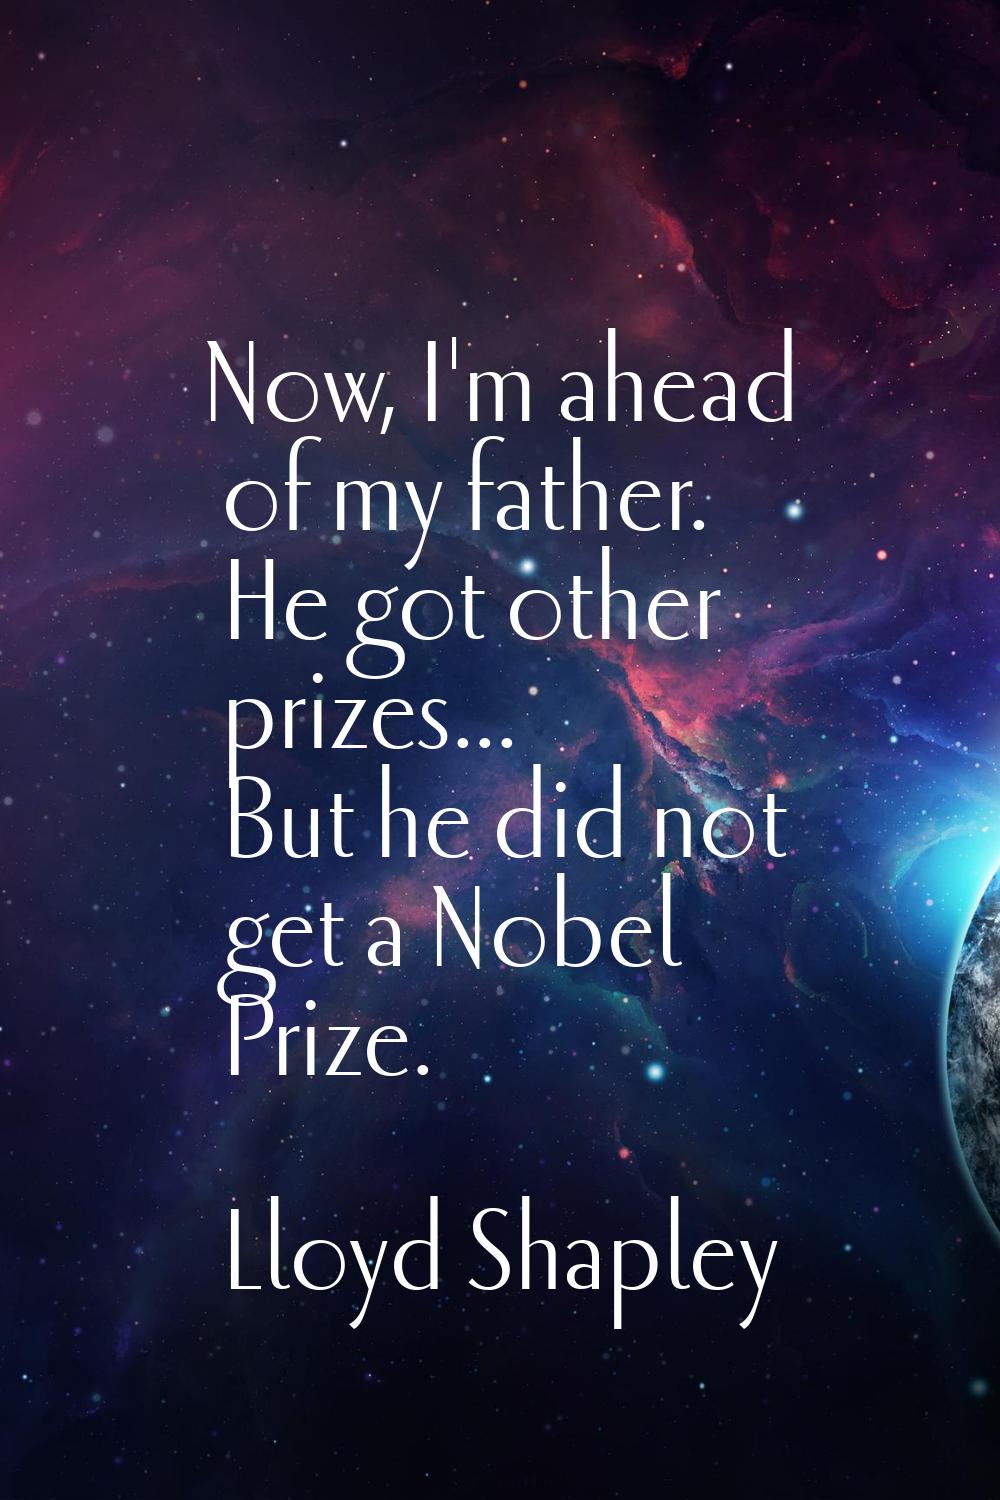 Now, I'm ahead of my father. He got other prizes... But he did not get a Nobel Prize.